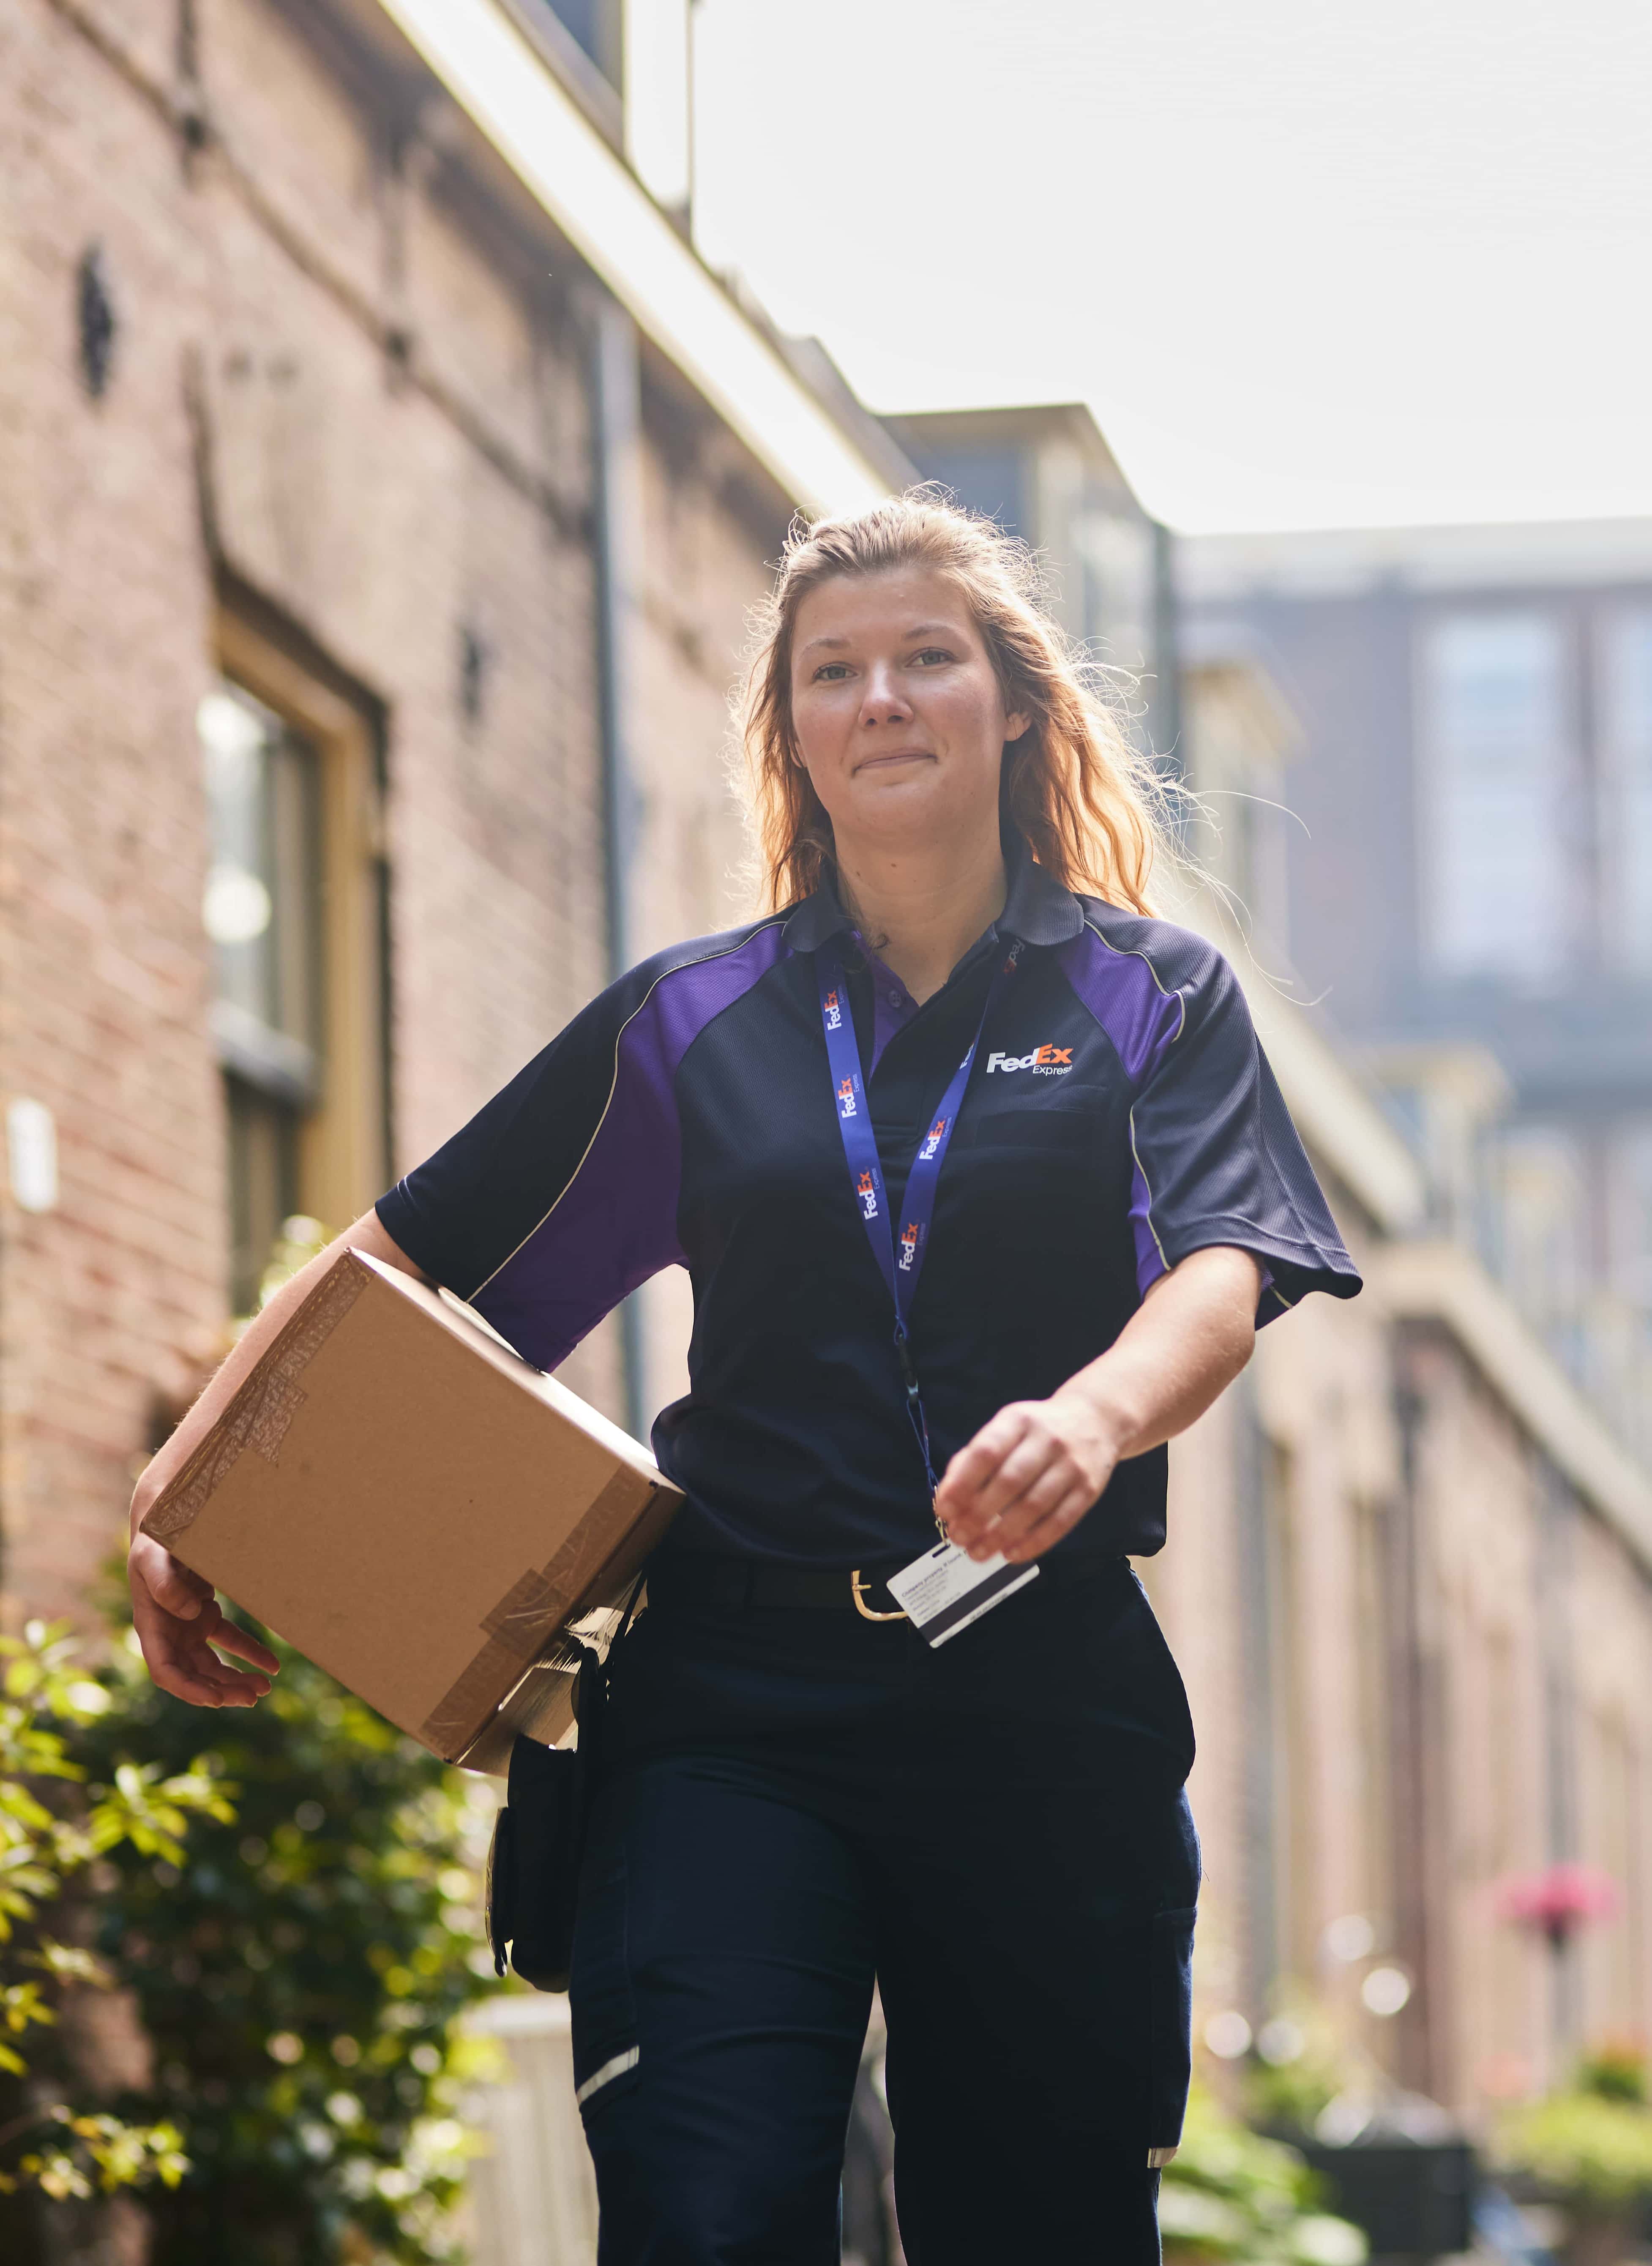 FedEx employee smiling and delivering a pacakge